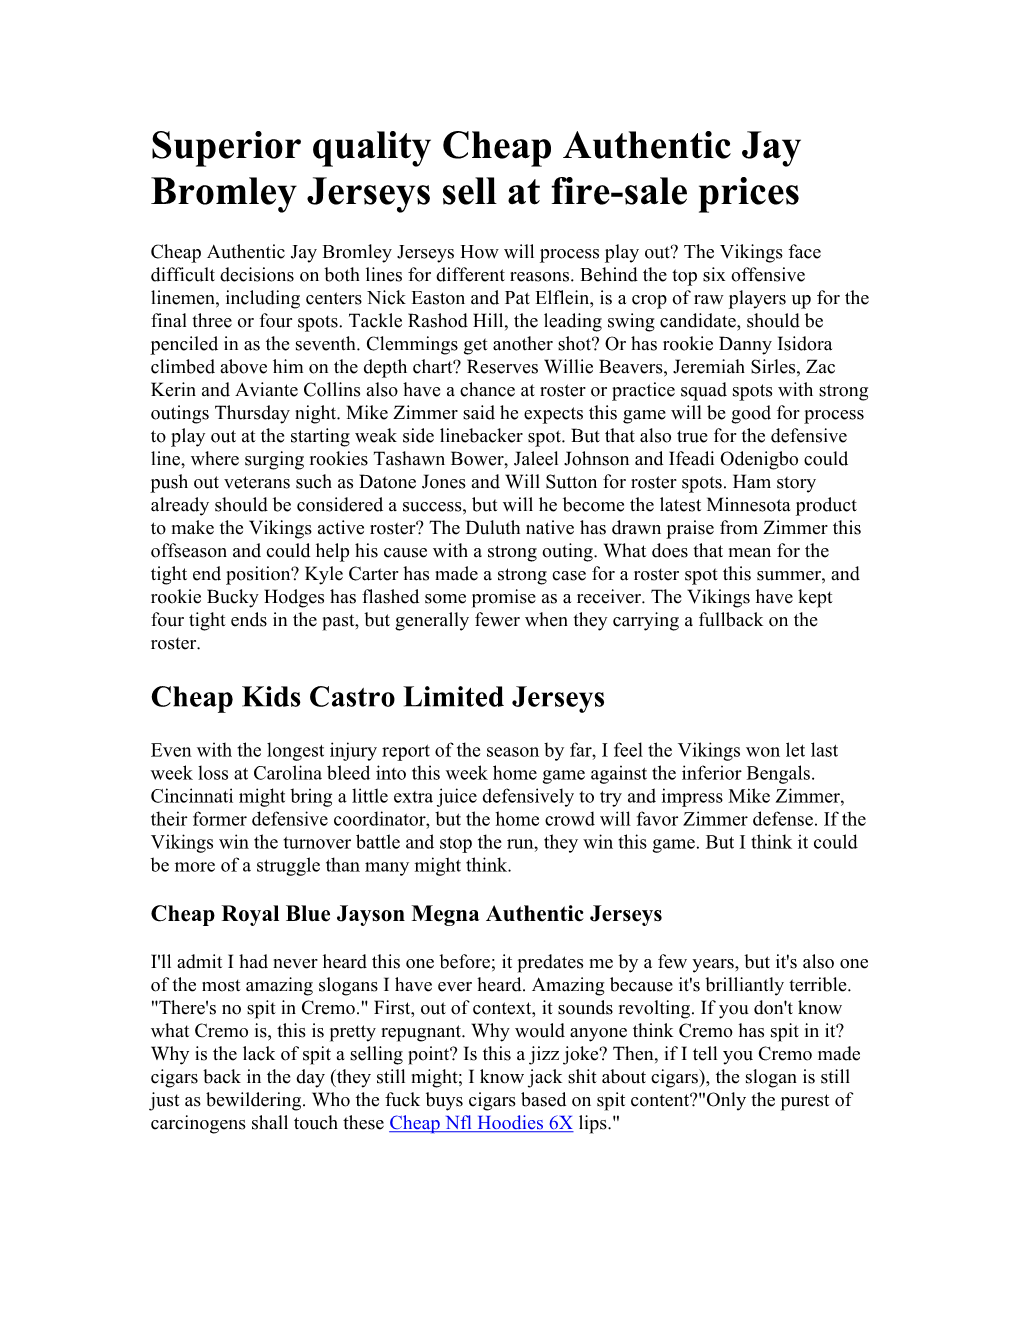 Superior Quality Cheap Authentic Jay Bromley Jerseys Sell at Fire-Sale Prices